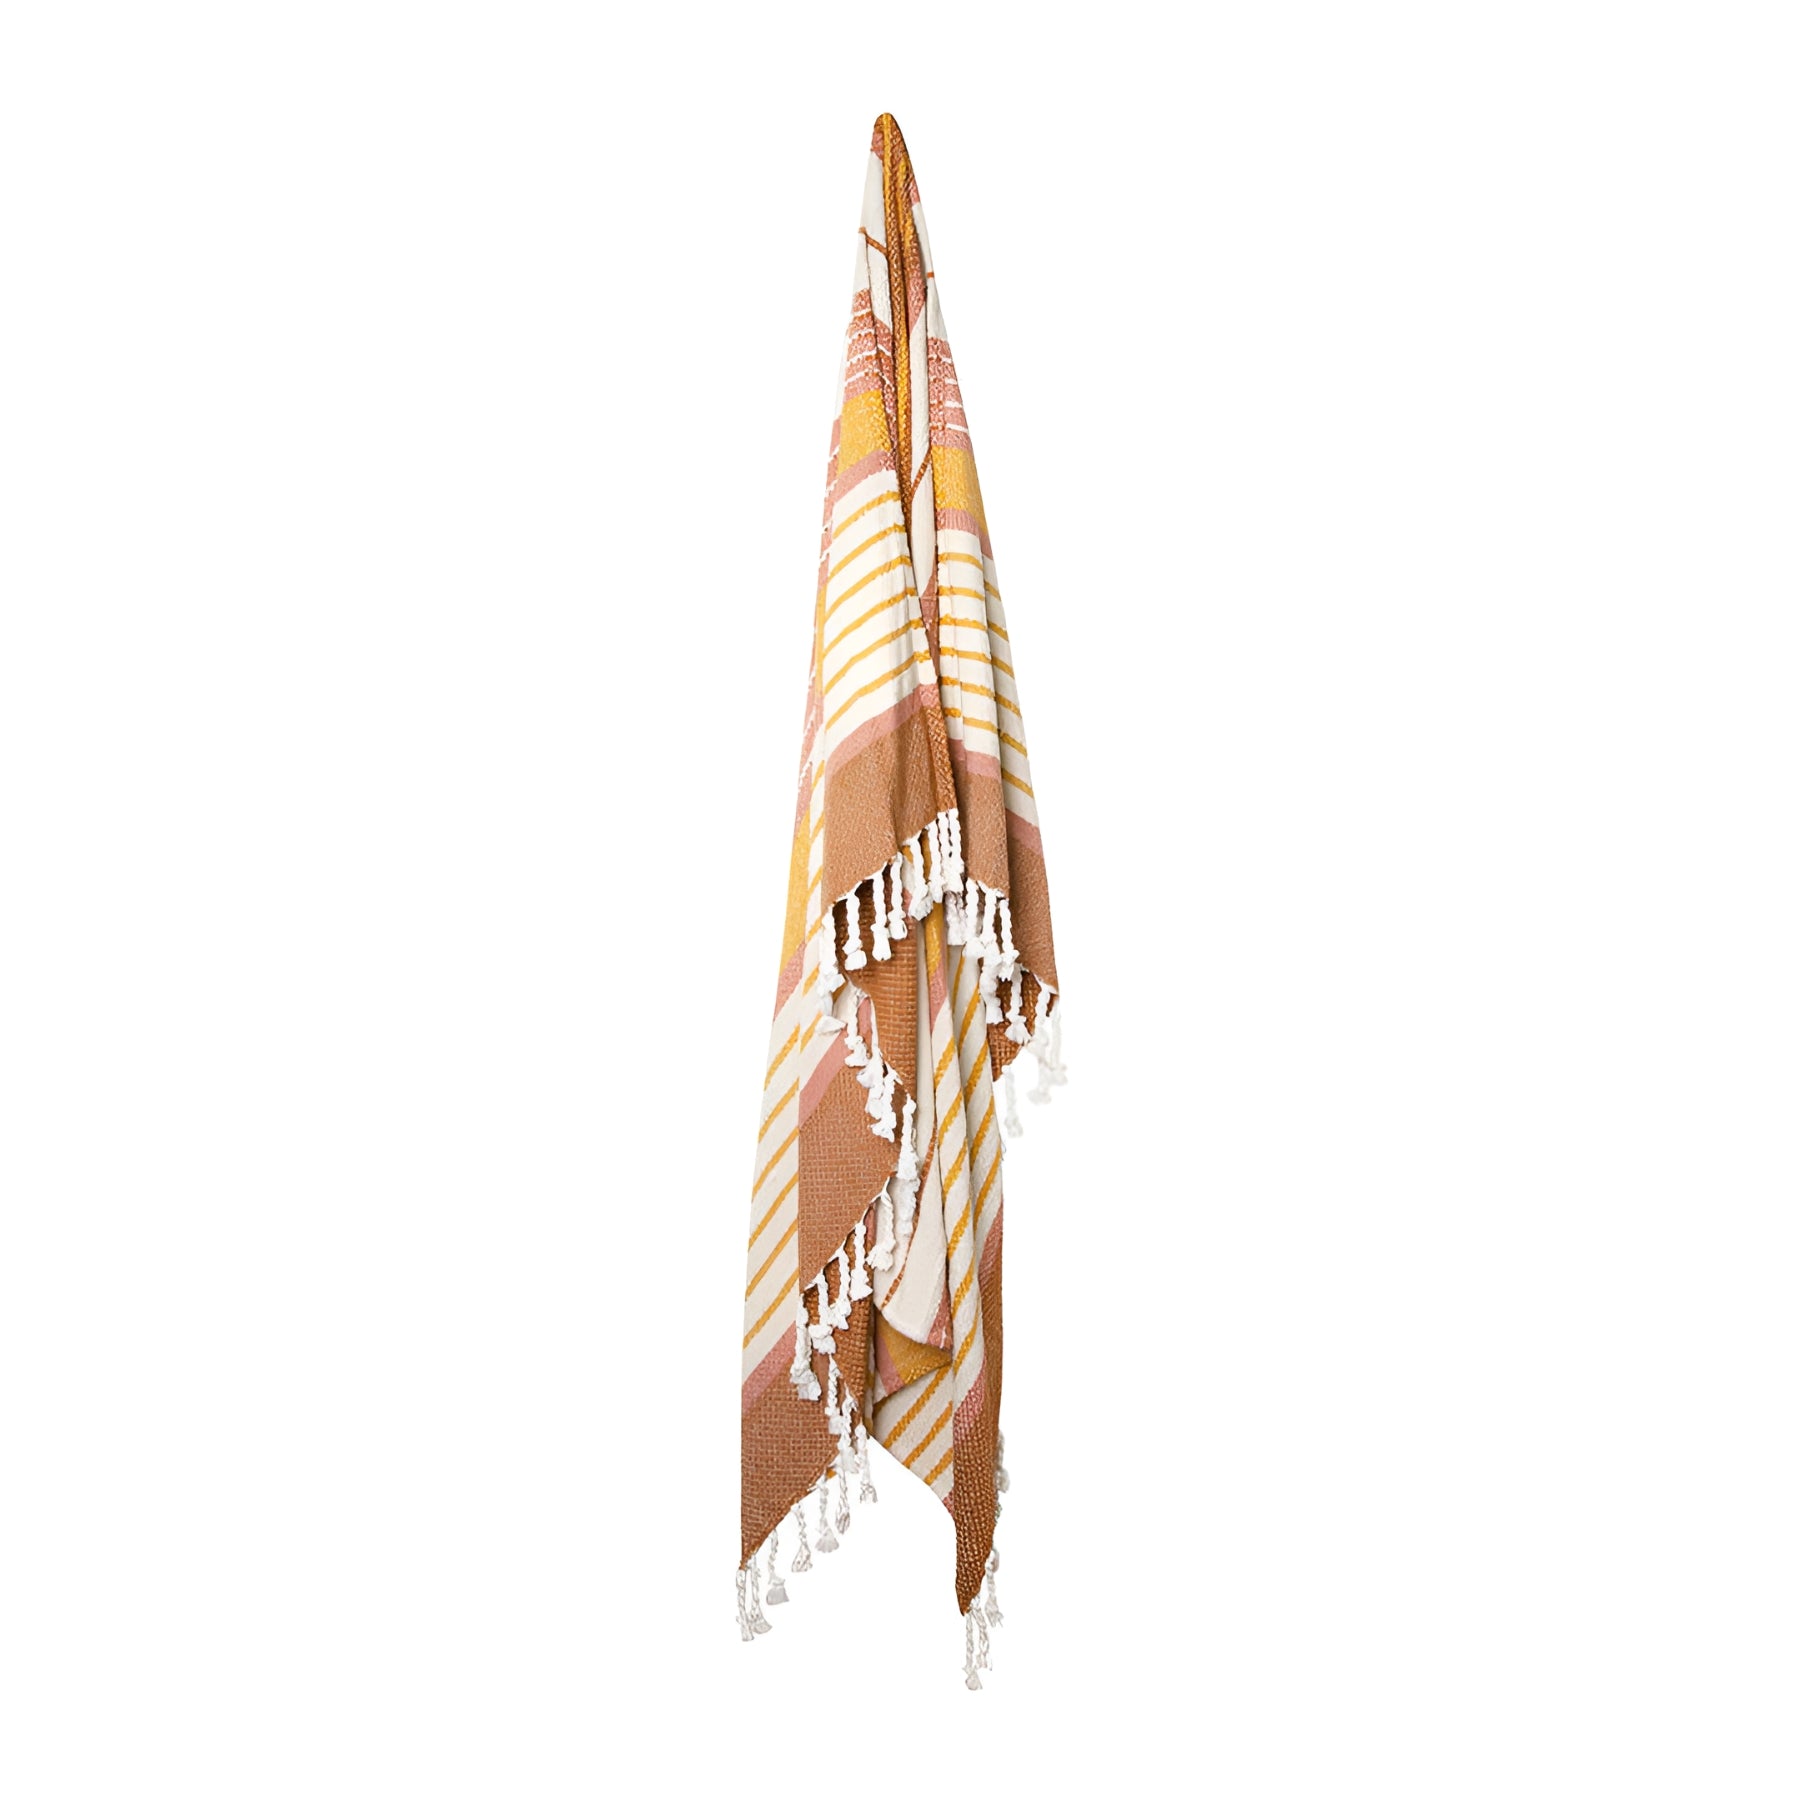 Casually draped Zephyr Throw in Peach Hues with tassels, exuding casual elegance.